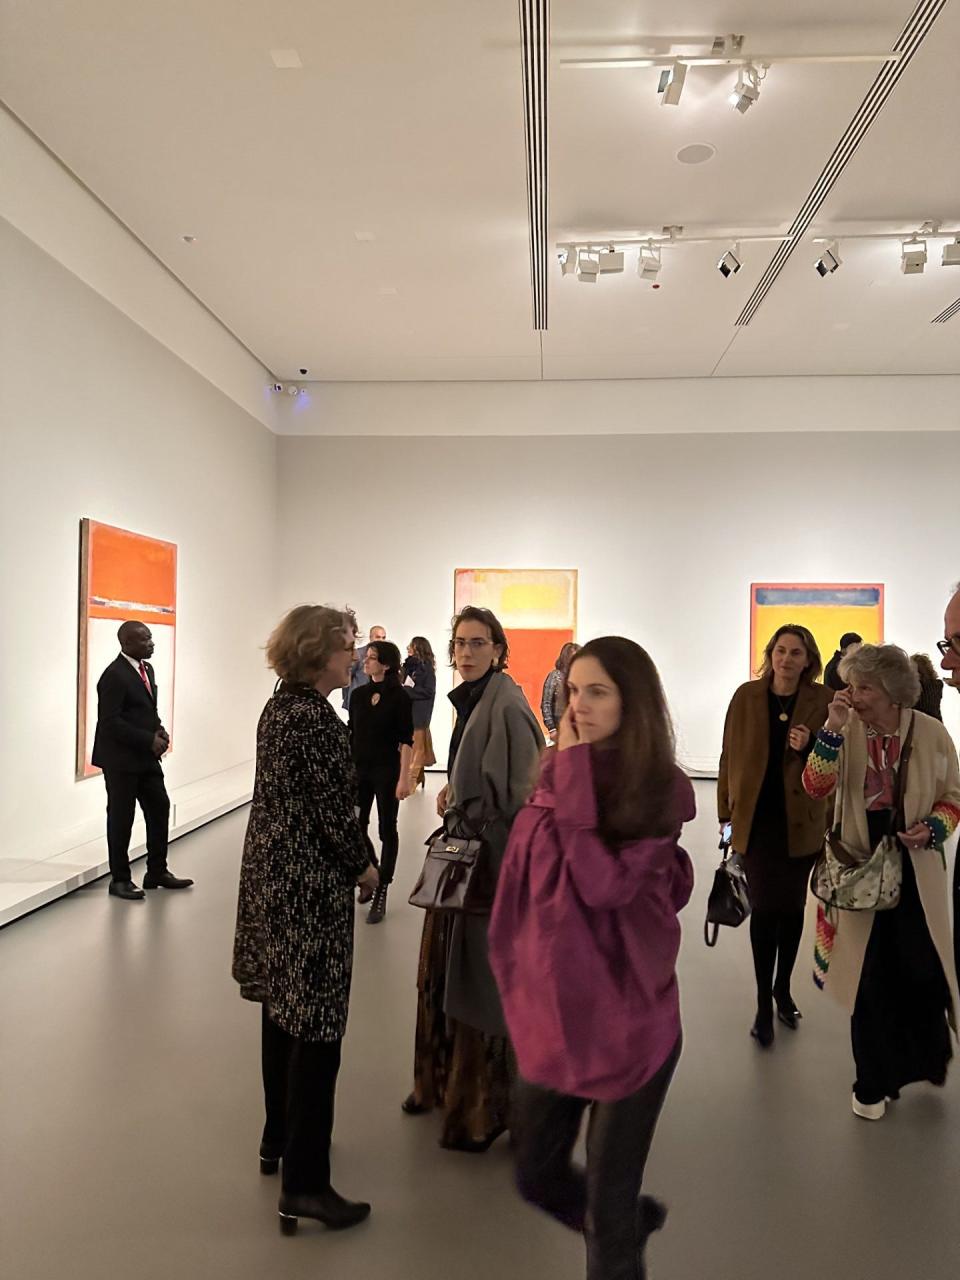 The Foundation Louis Vuitton in Paris hosts the opening night of the Rothko retrospective exhibition.